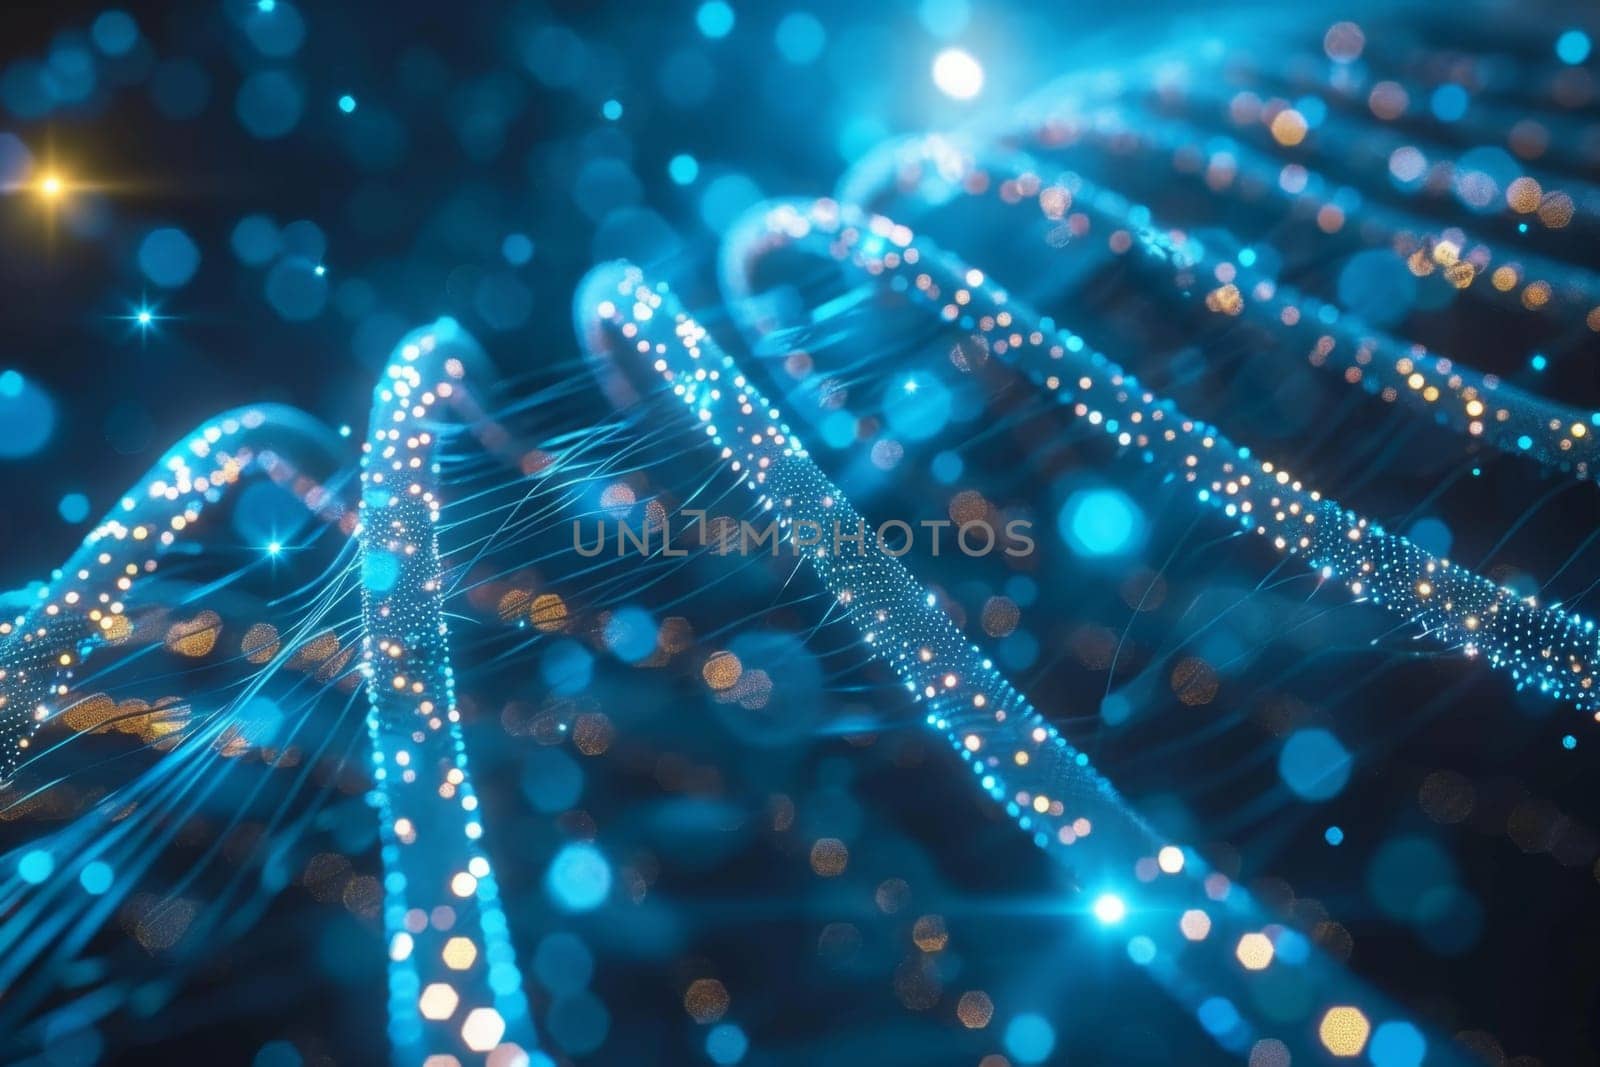 A DNA spiral on an abstract dark background. Biohacking. 3d illustration.